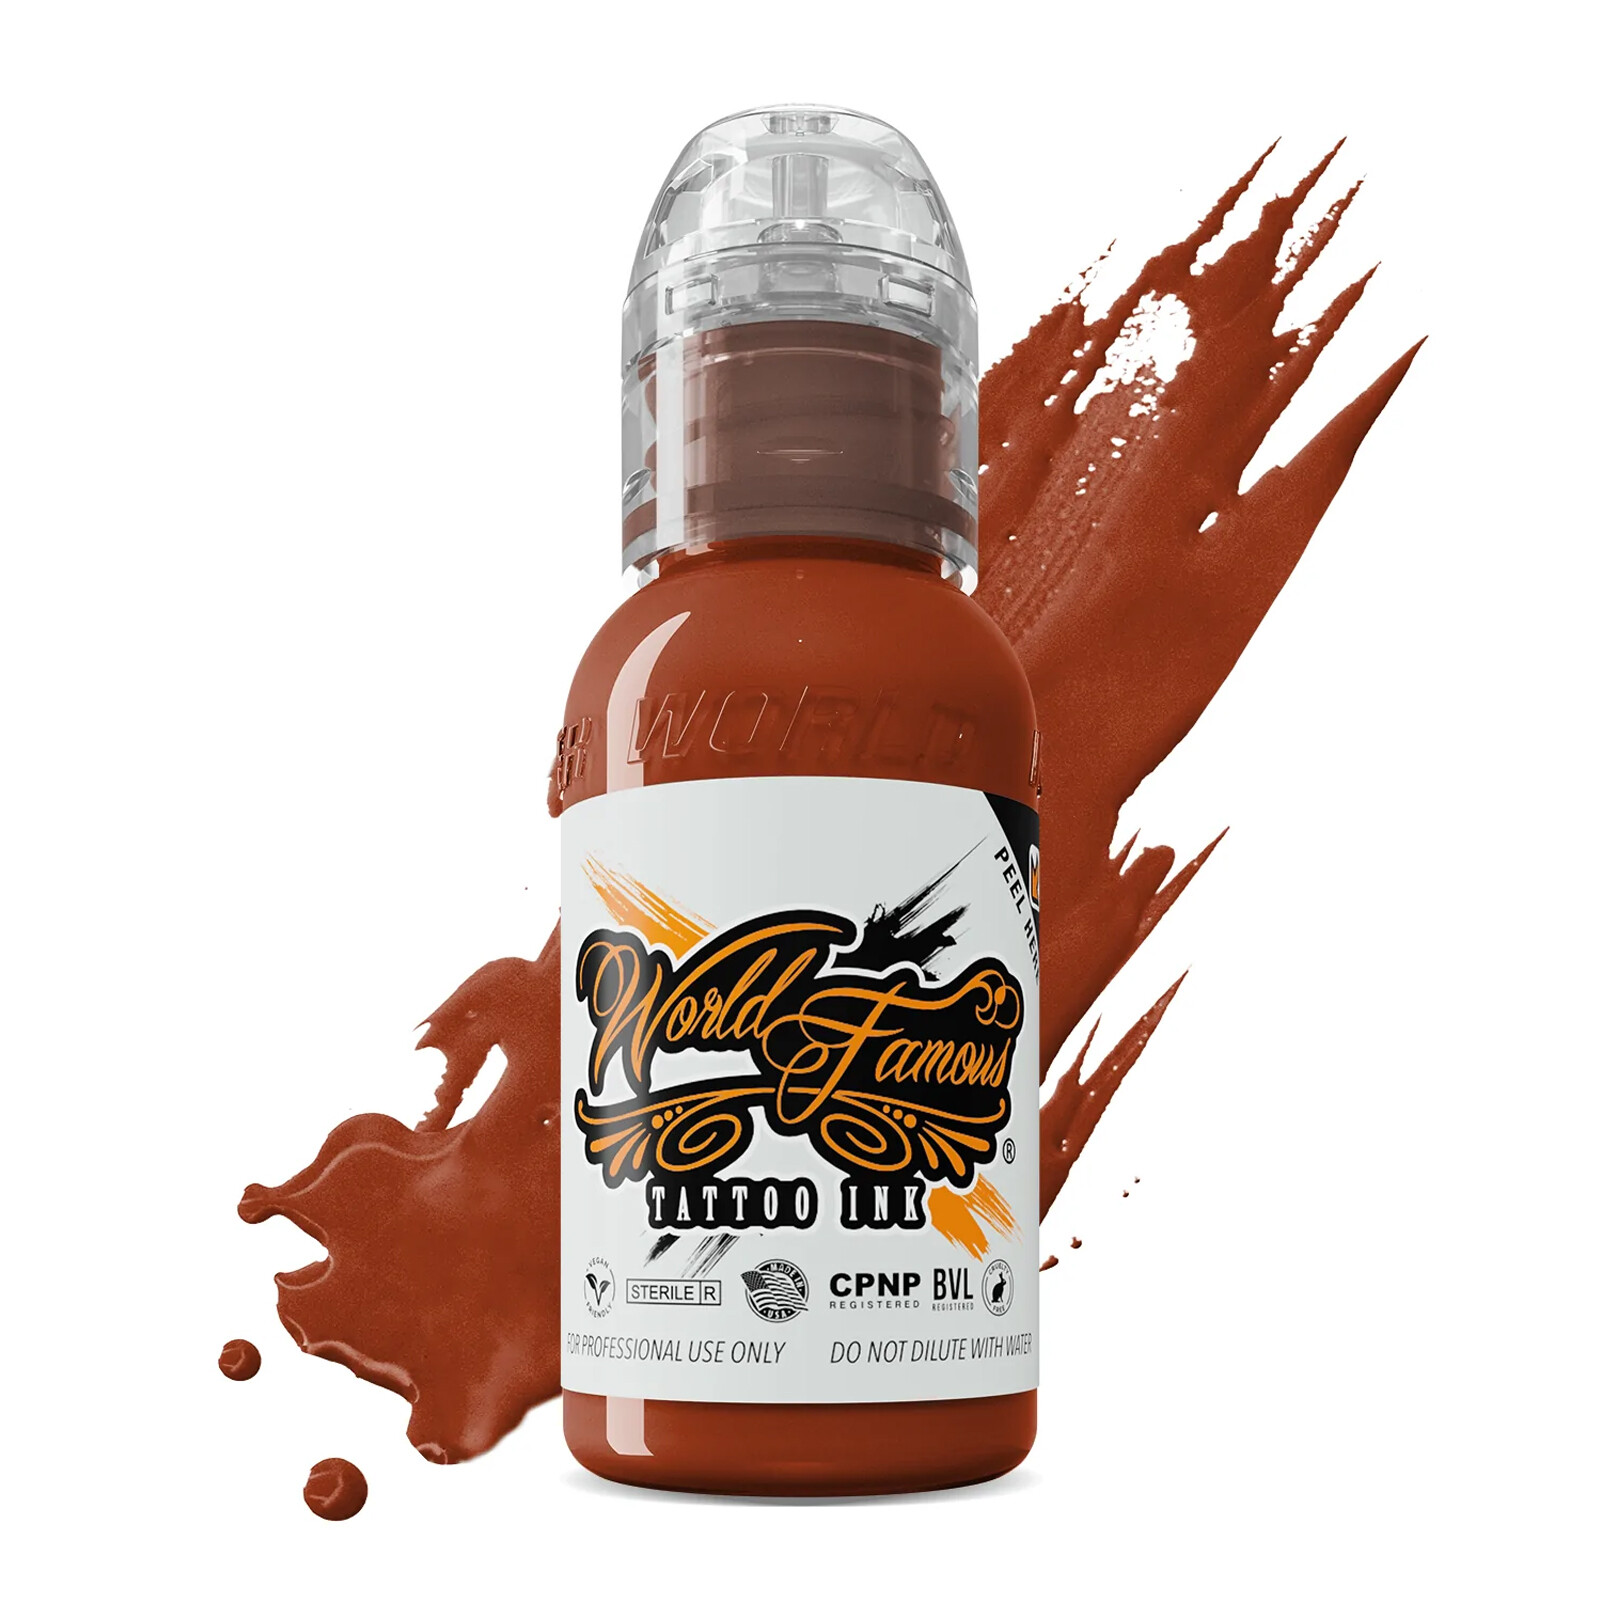 Краска World Famous Tattoo Ink Red Clay 1 Унция 30 мл краска world famous tattoo ink red hot chili peper 1 унция 30 мл